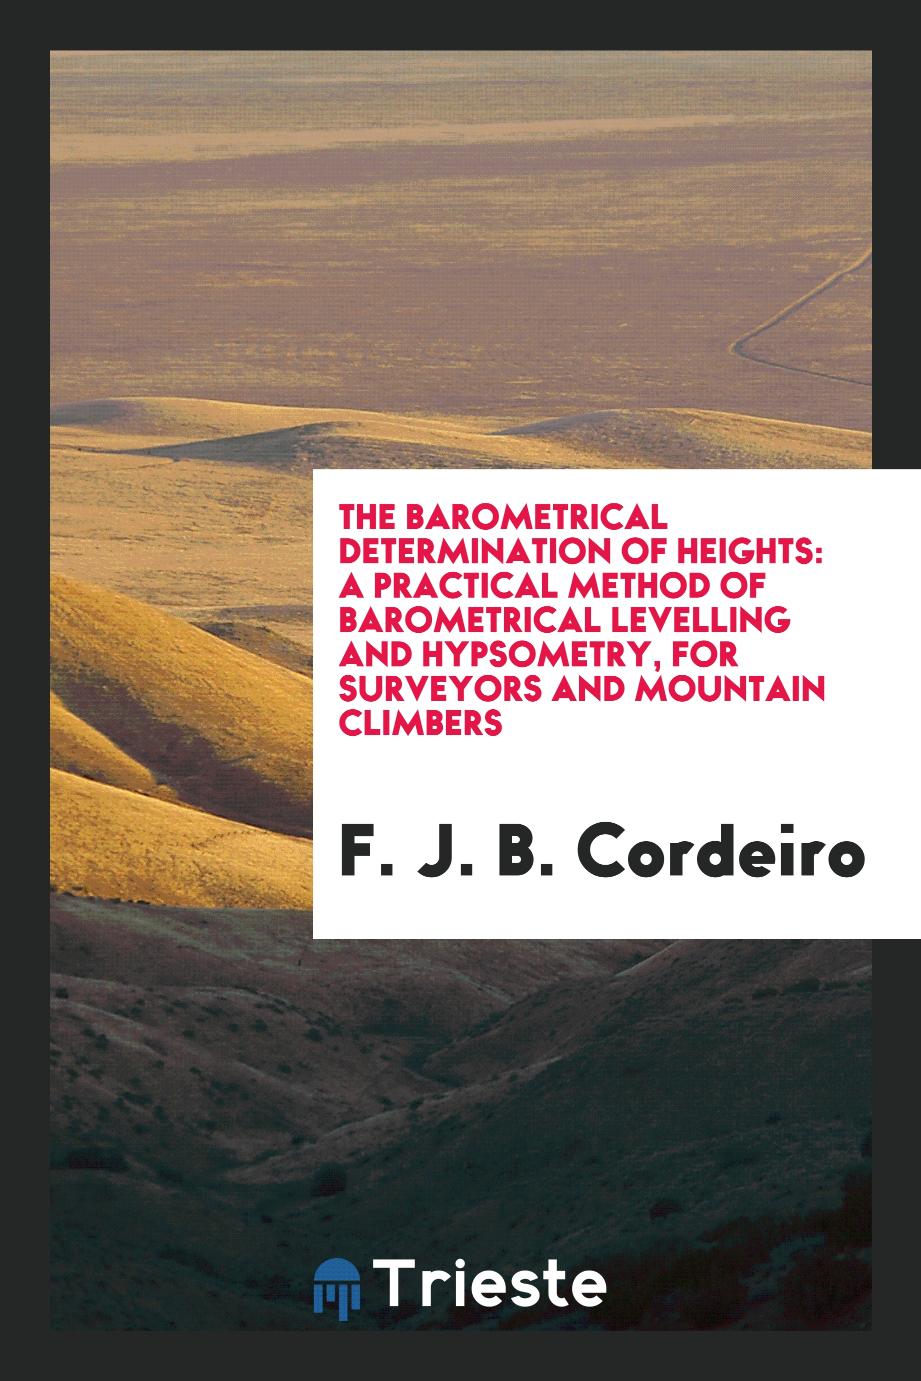 The Barometrical Determination of Heights: A Practical Method of barometrical levelling and hypsometry, for Surveyors and mountain climbers